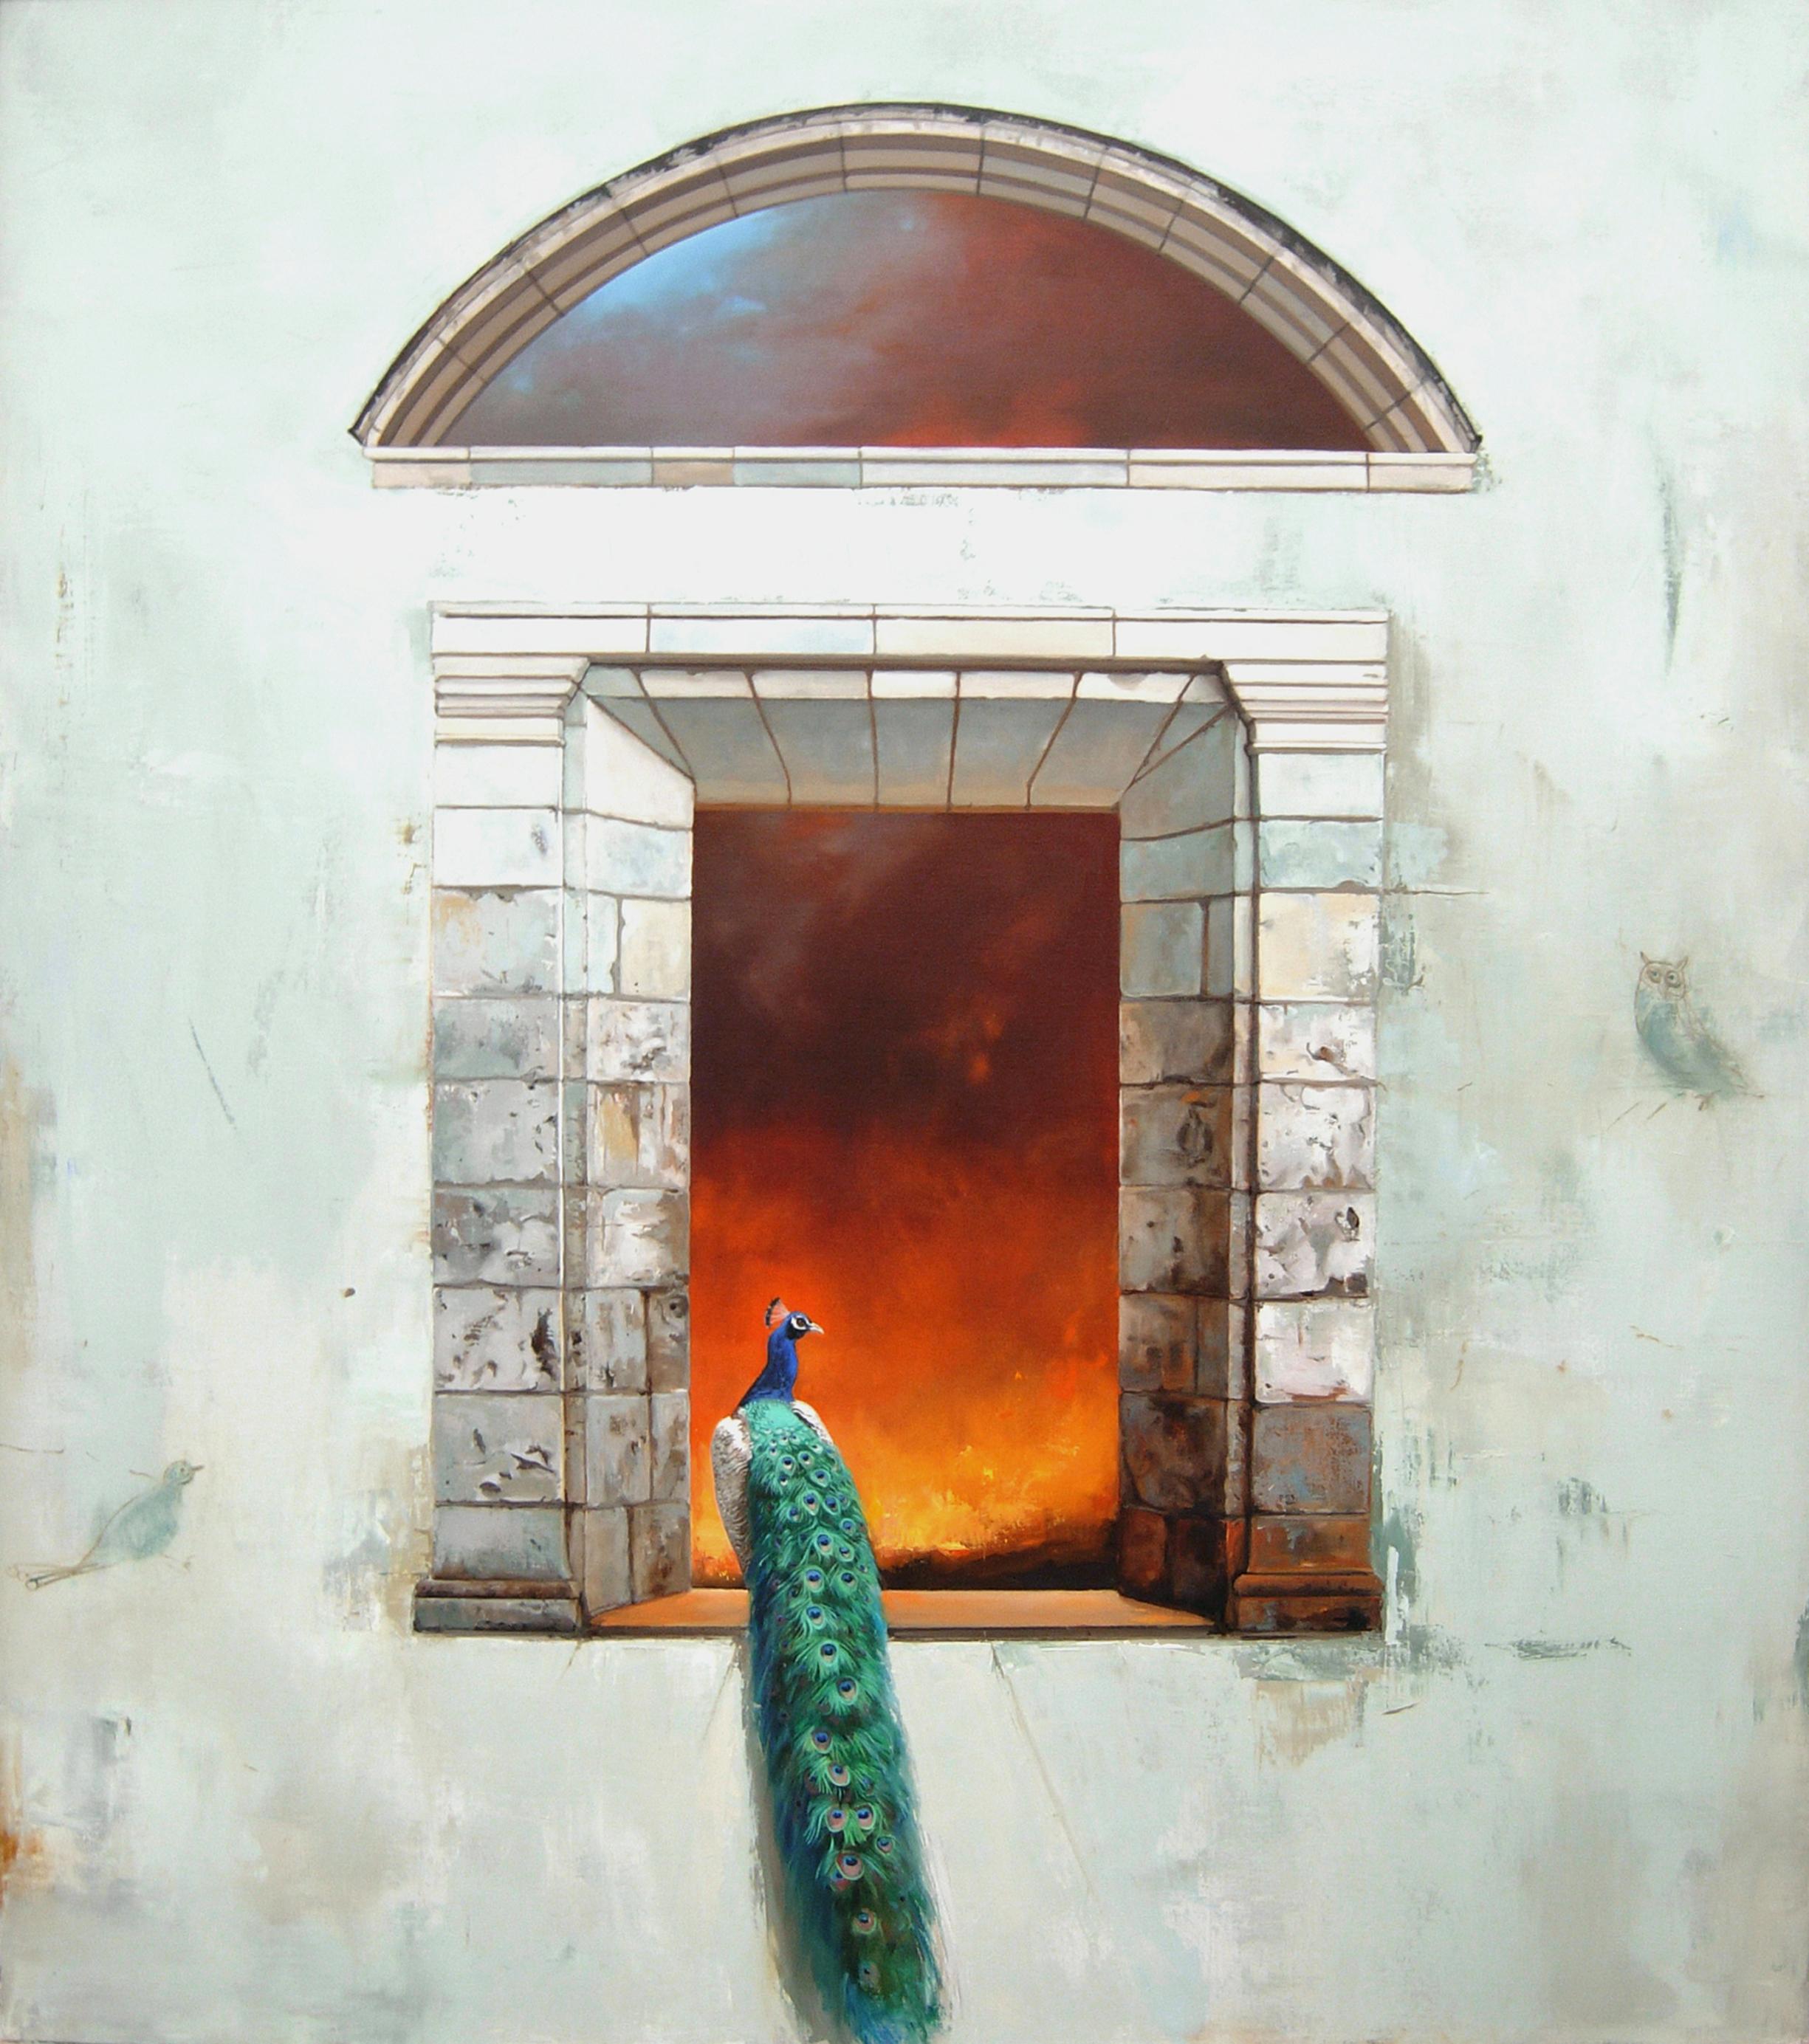 Carol Pylant Animal Painting - Inferno - Classic Architectural Stone Window with Peacock & Fire Scene